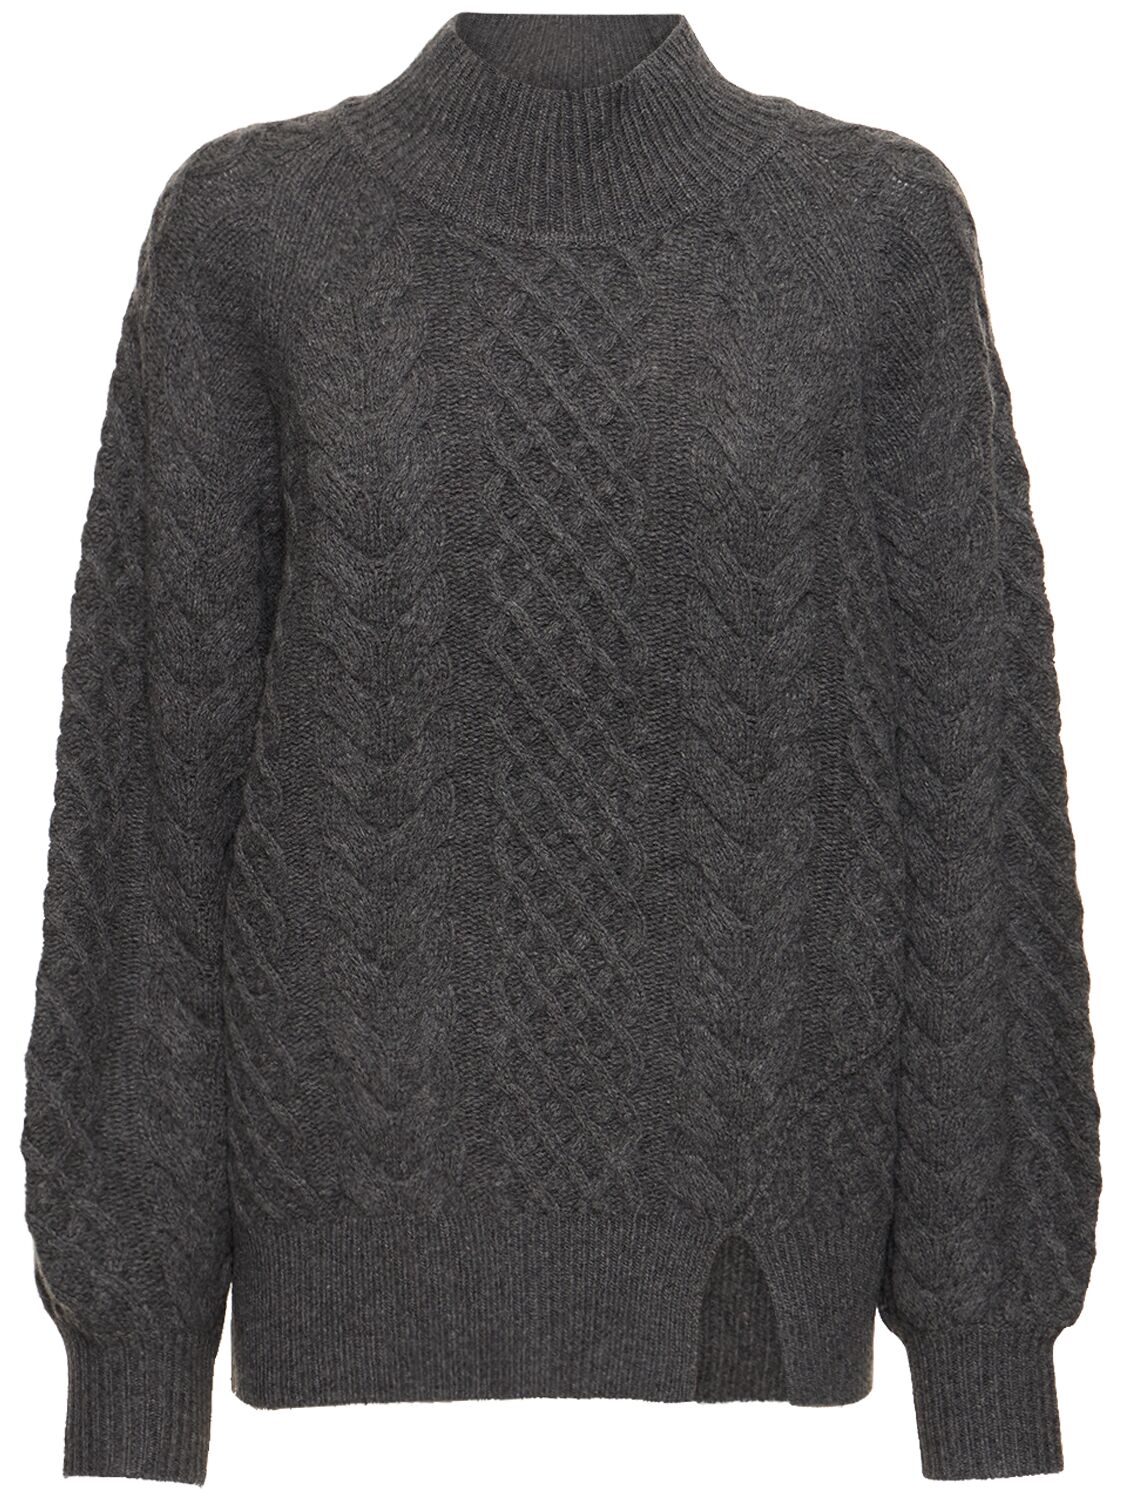 Image of Como Wool Blend Cable Knit Sweater